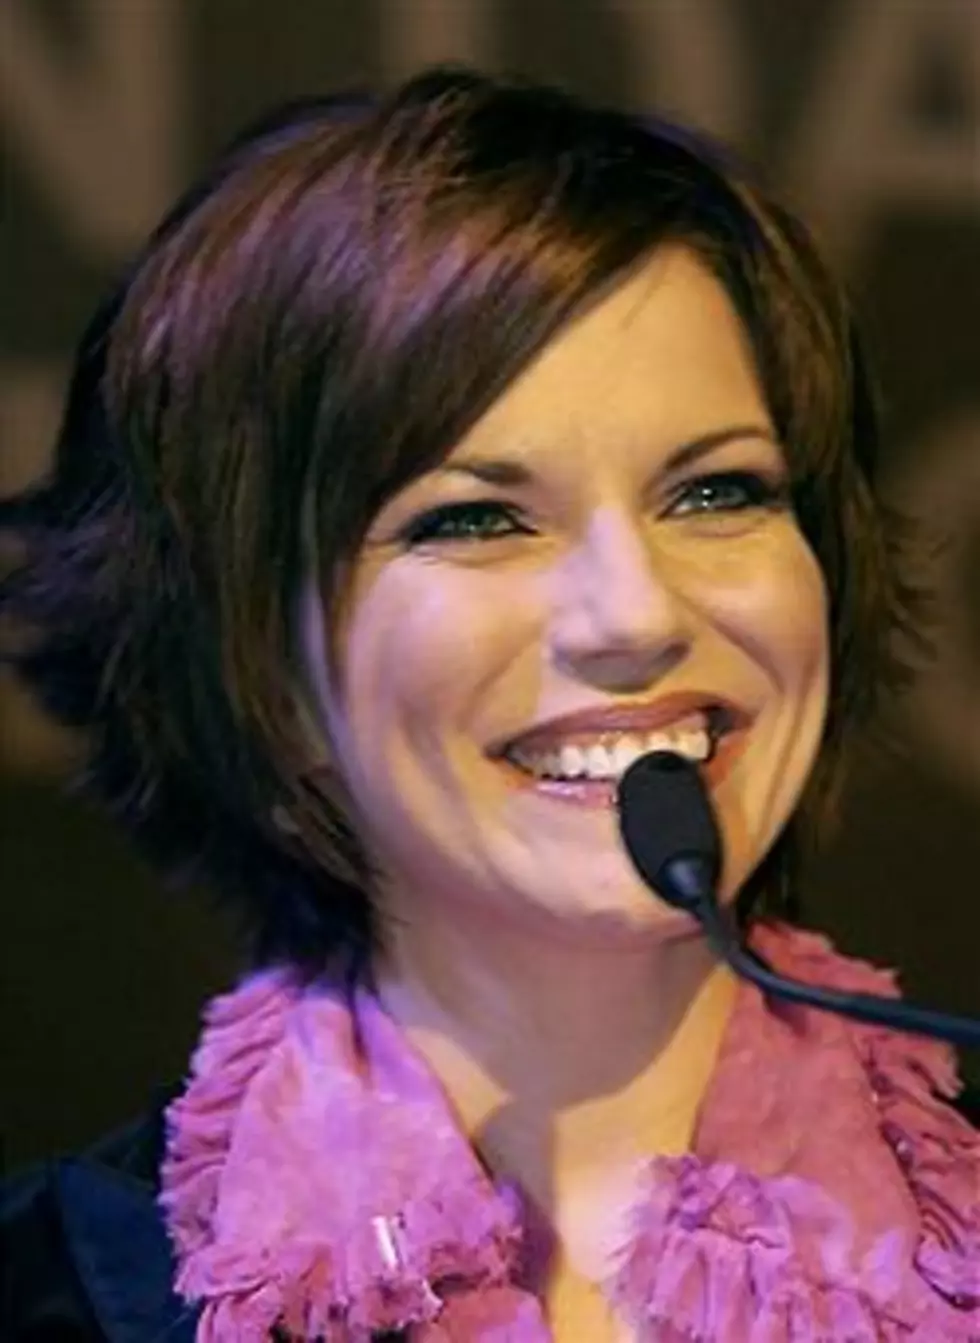 1995 &#8211; Martina McBride &#8211; Crazy &#038; Induction into The Grand Ole Opry by Loretta Lynn [Audio]